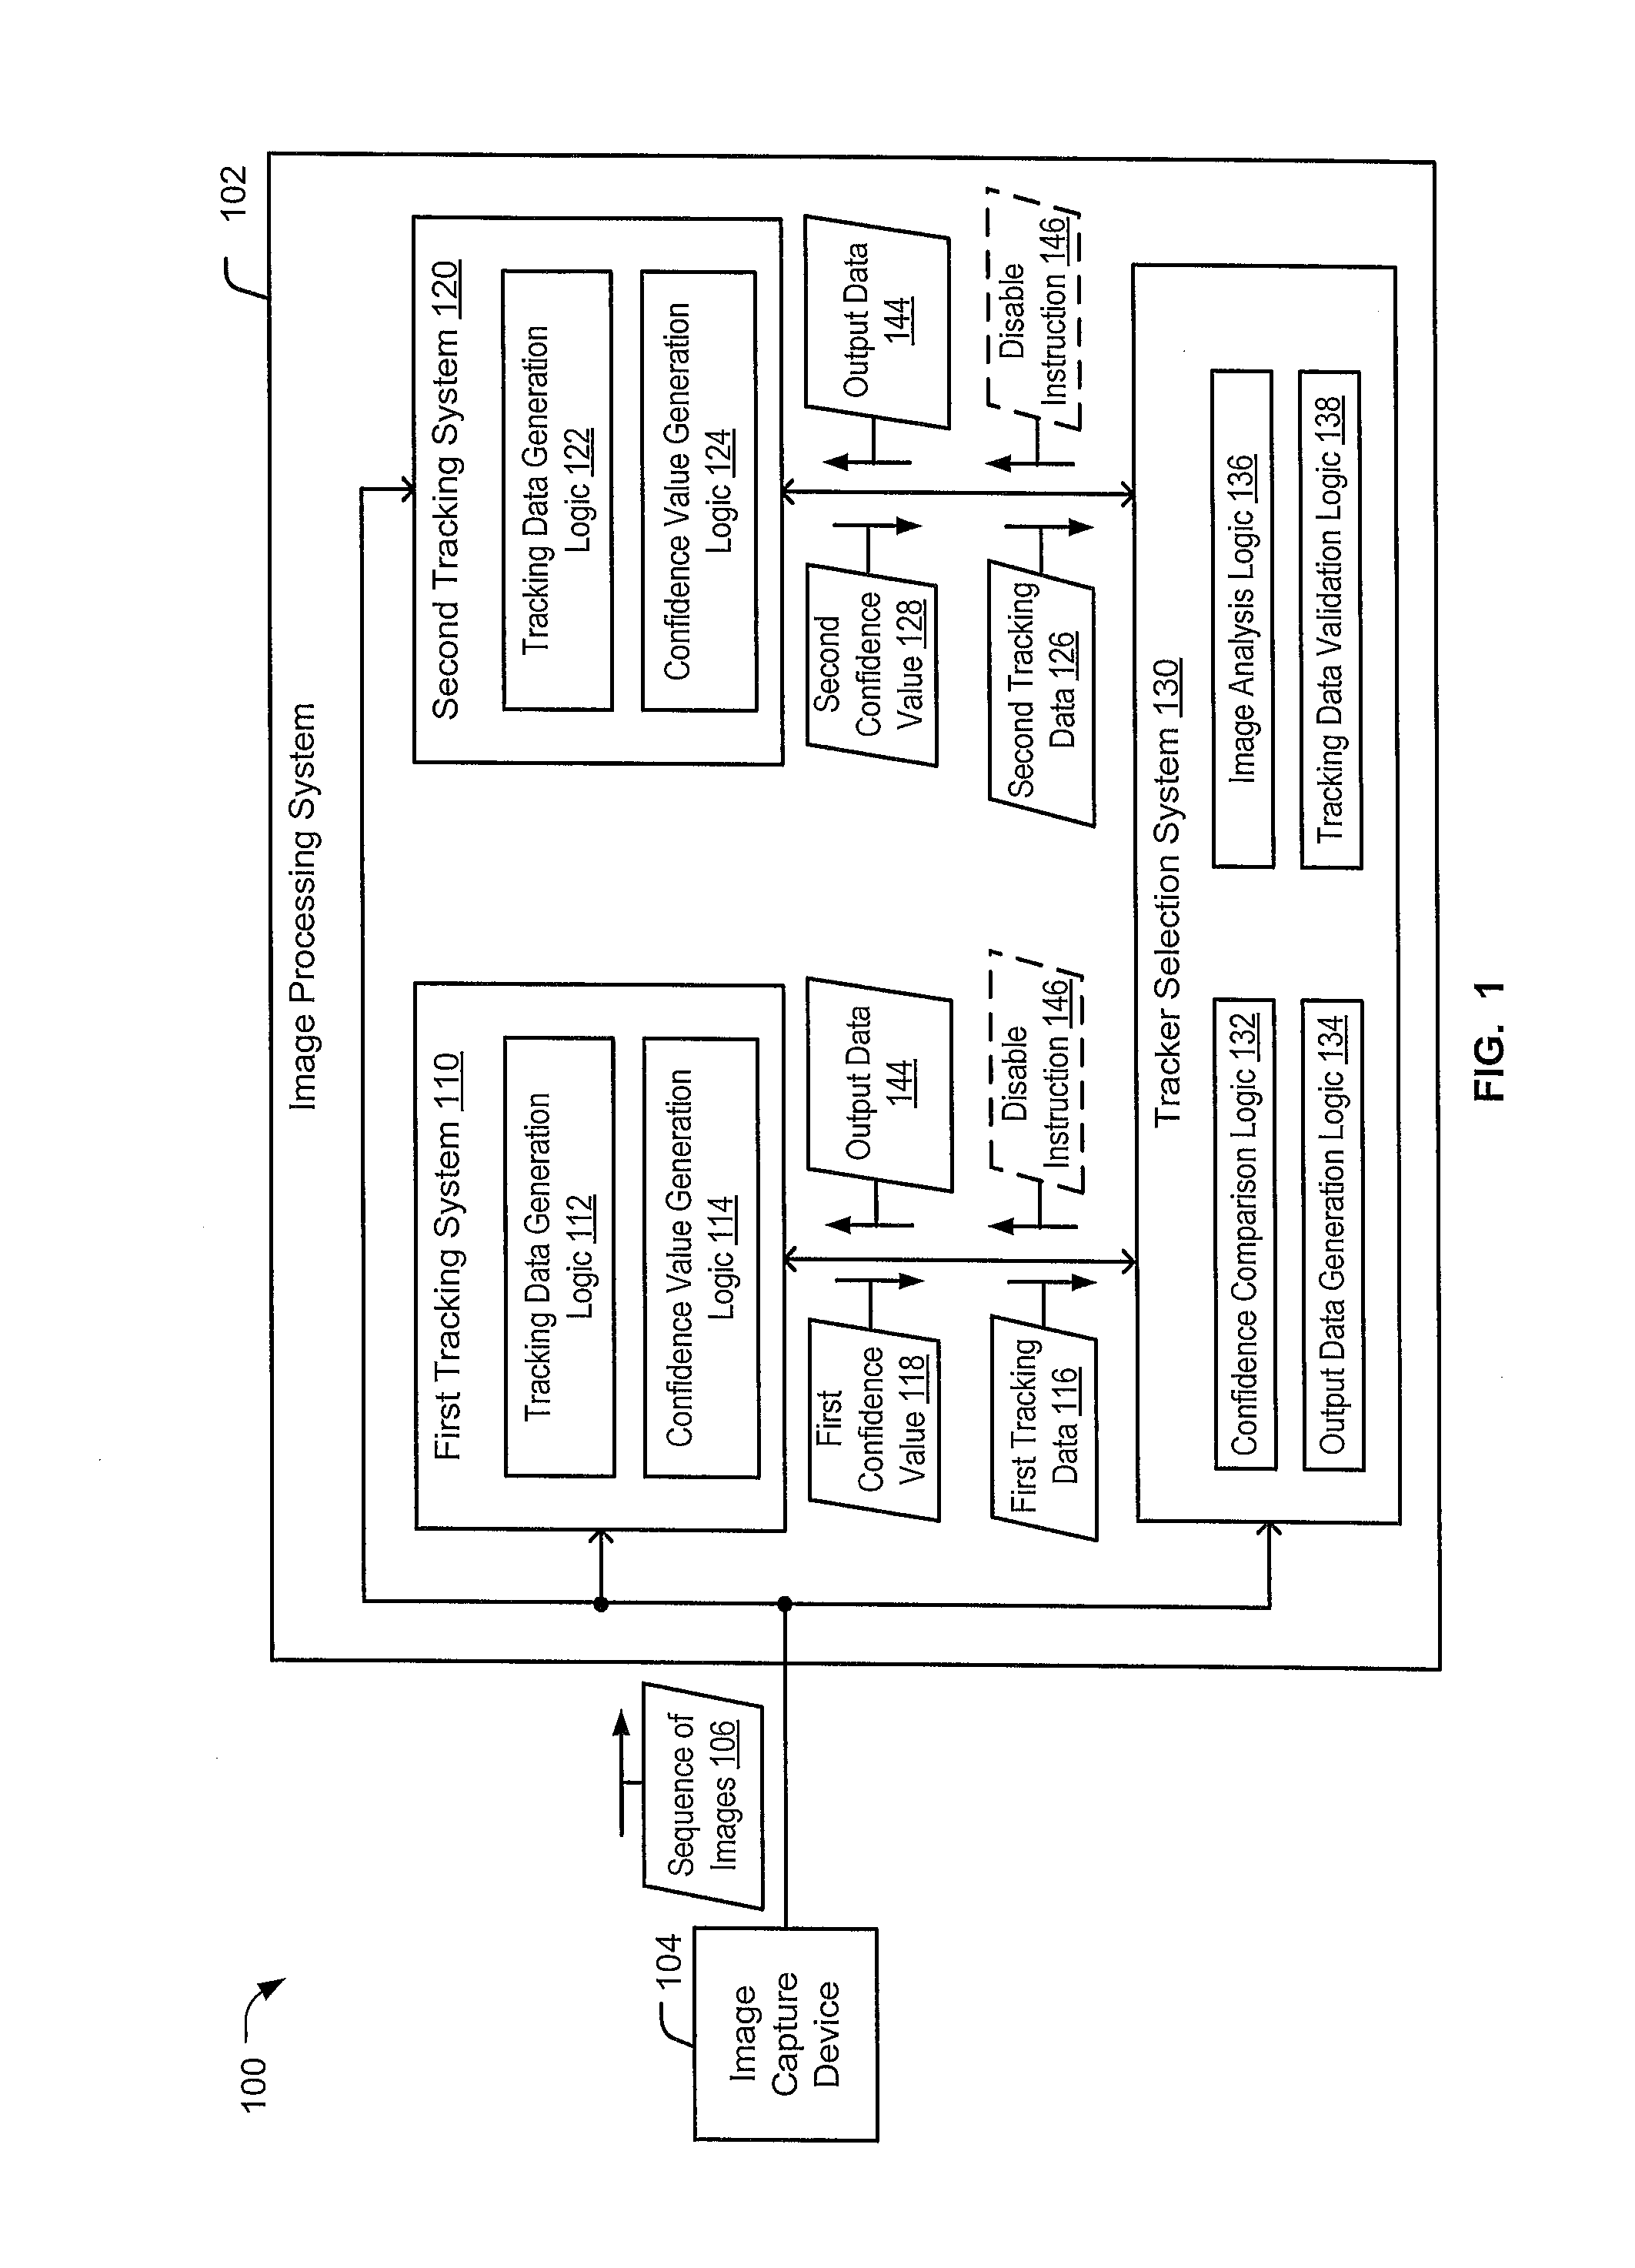 System and method to improve object tracking using multiple tracking systems